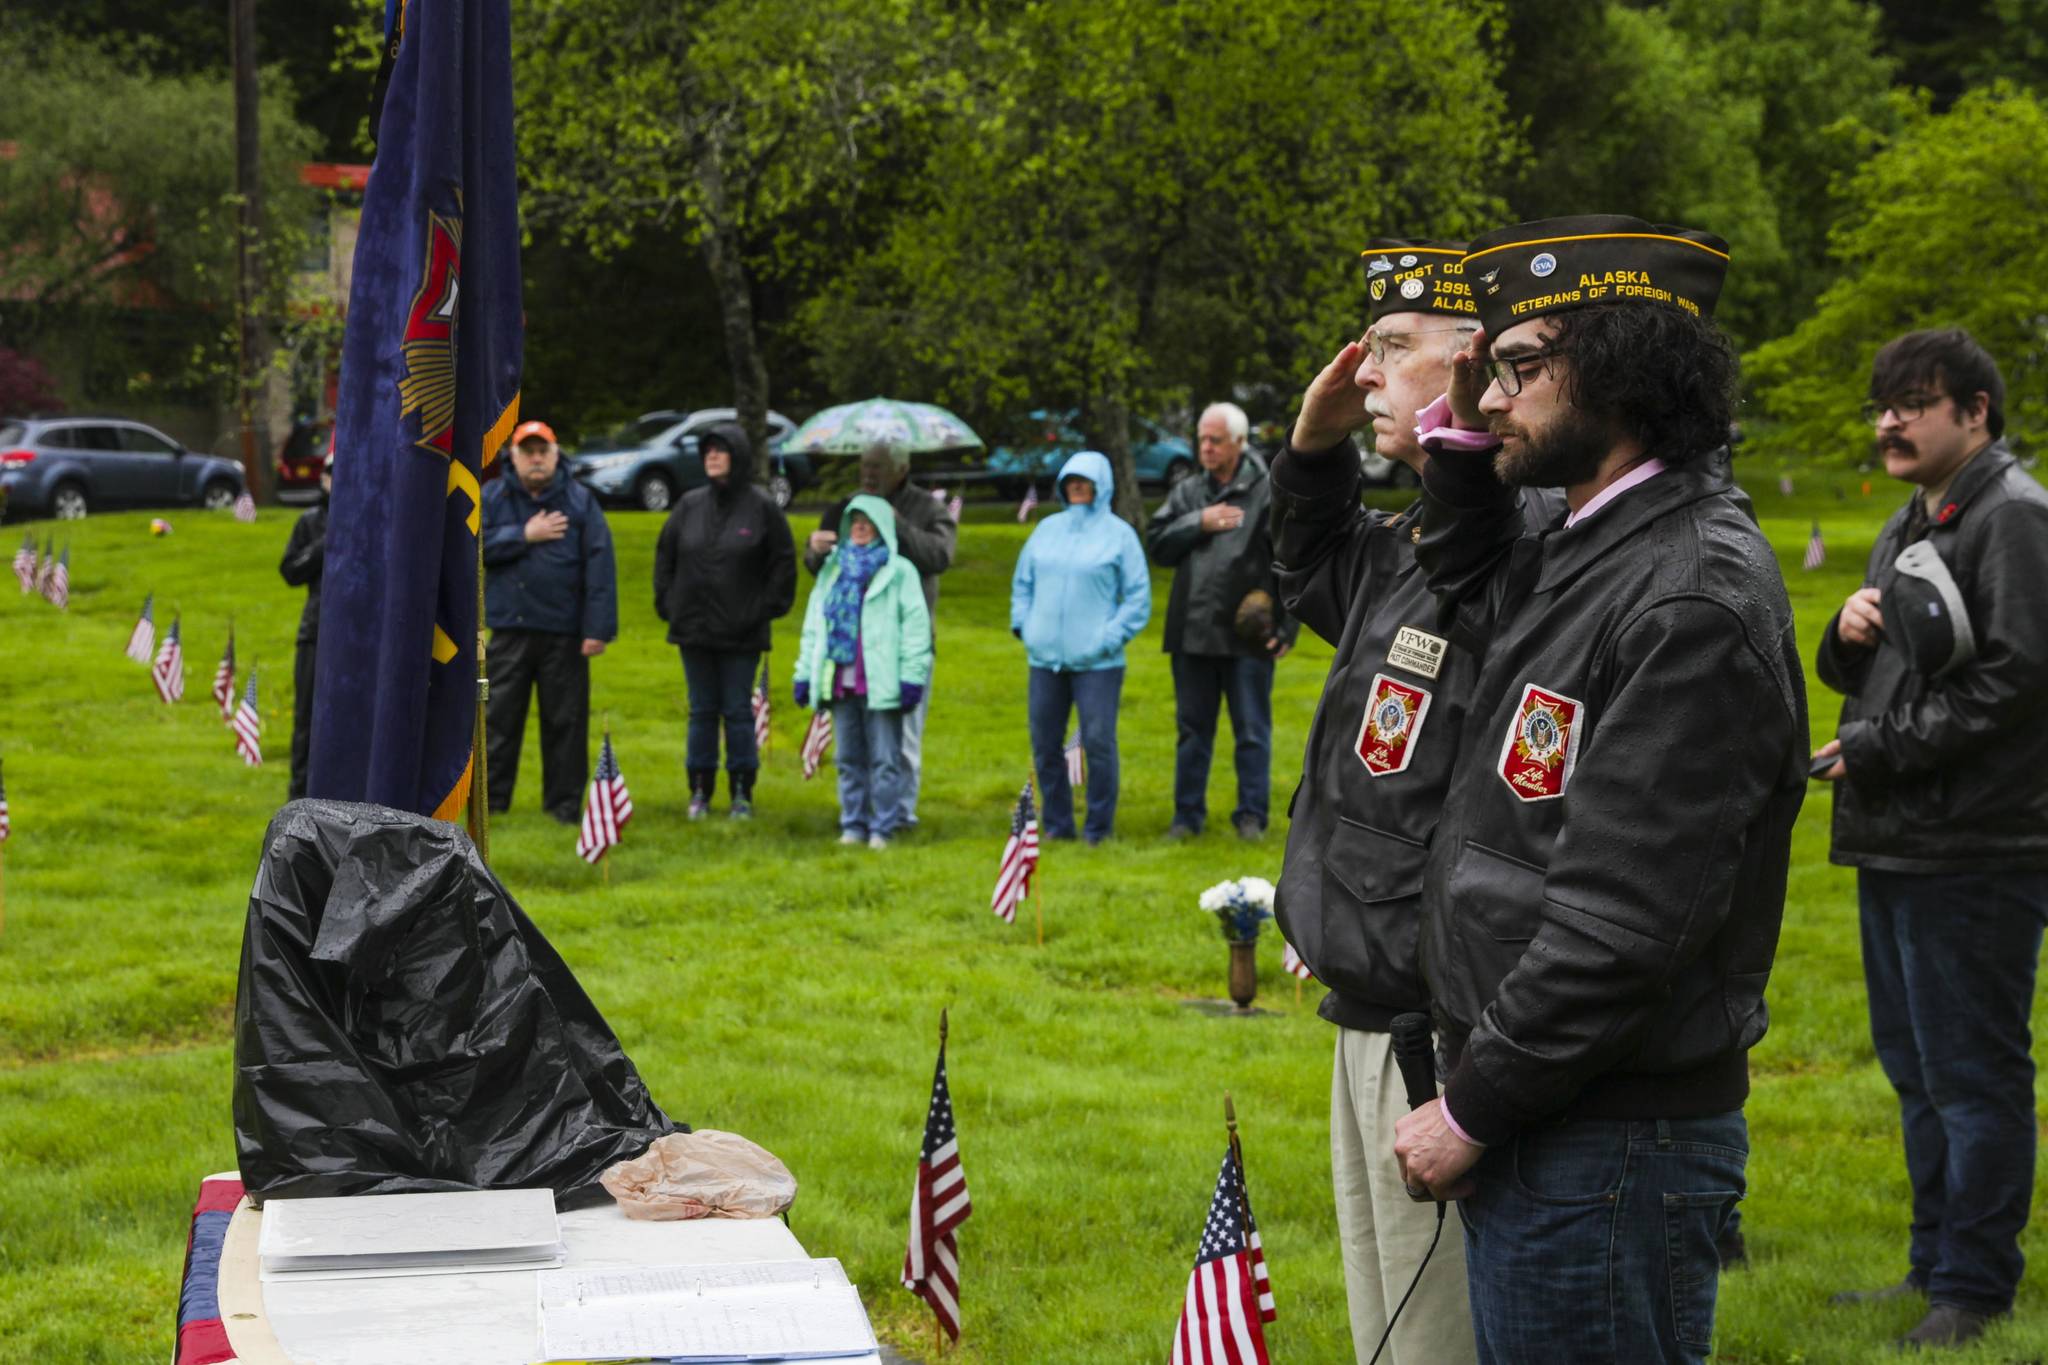 Veterans of Foreign Wars Post 5559 junior vice commander David Carroll, nearer, and post service officer Tom Armstrong, further, salute during a Memorial Day ceremony at Evergreen Cemetery on May 31, 2021. (Michael S. Lockett / Juneau Empire)